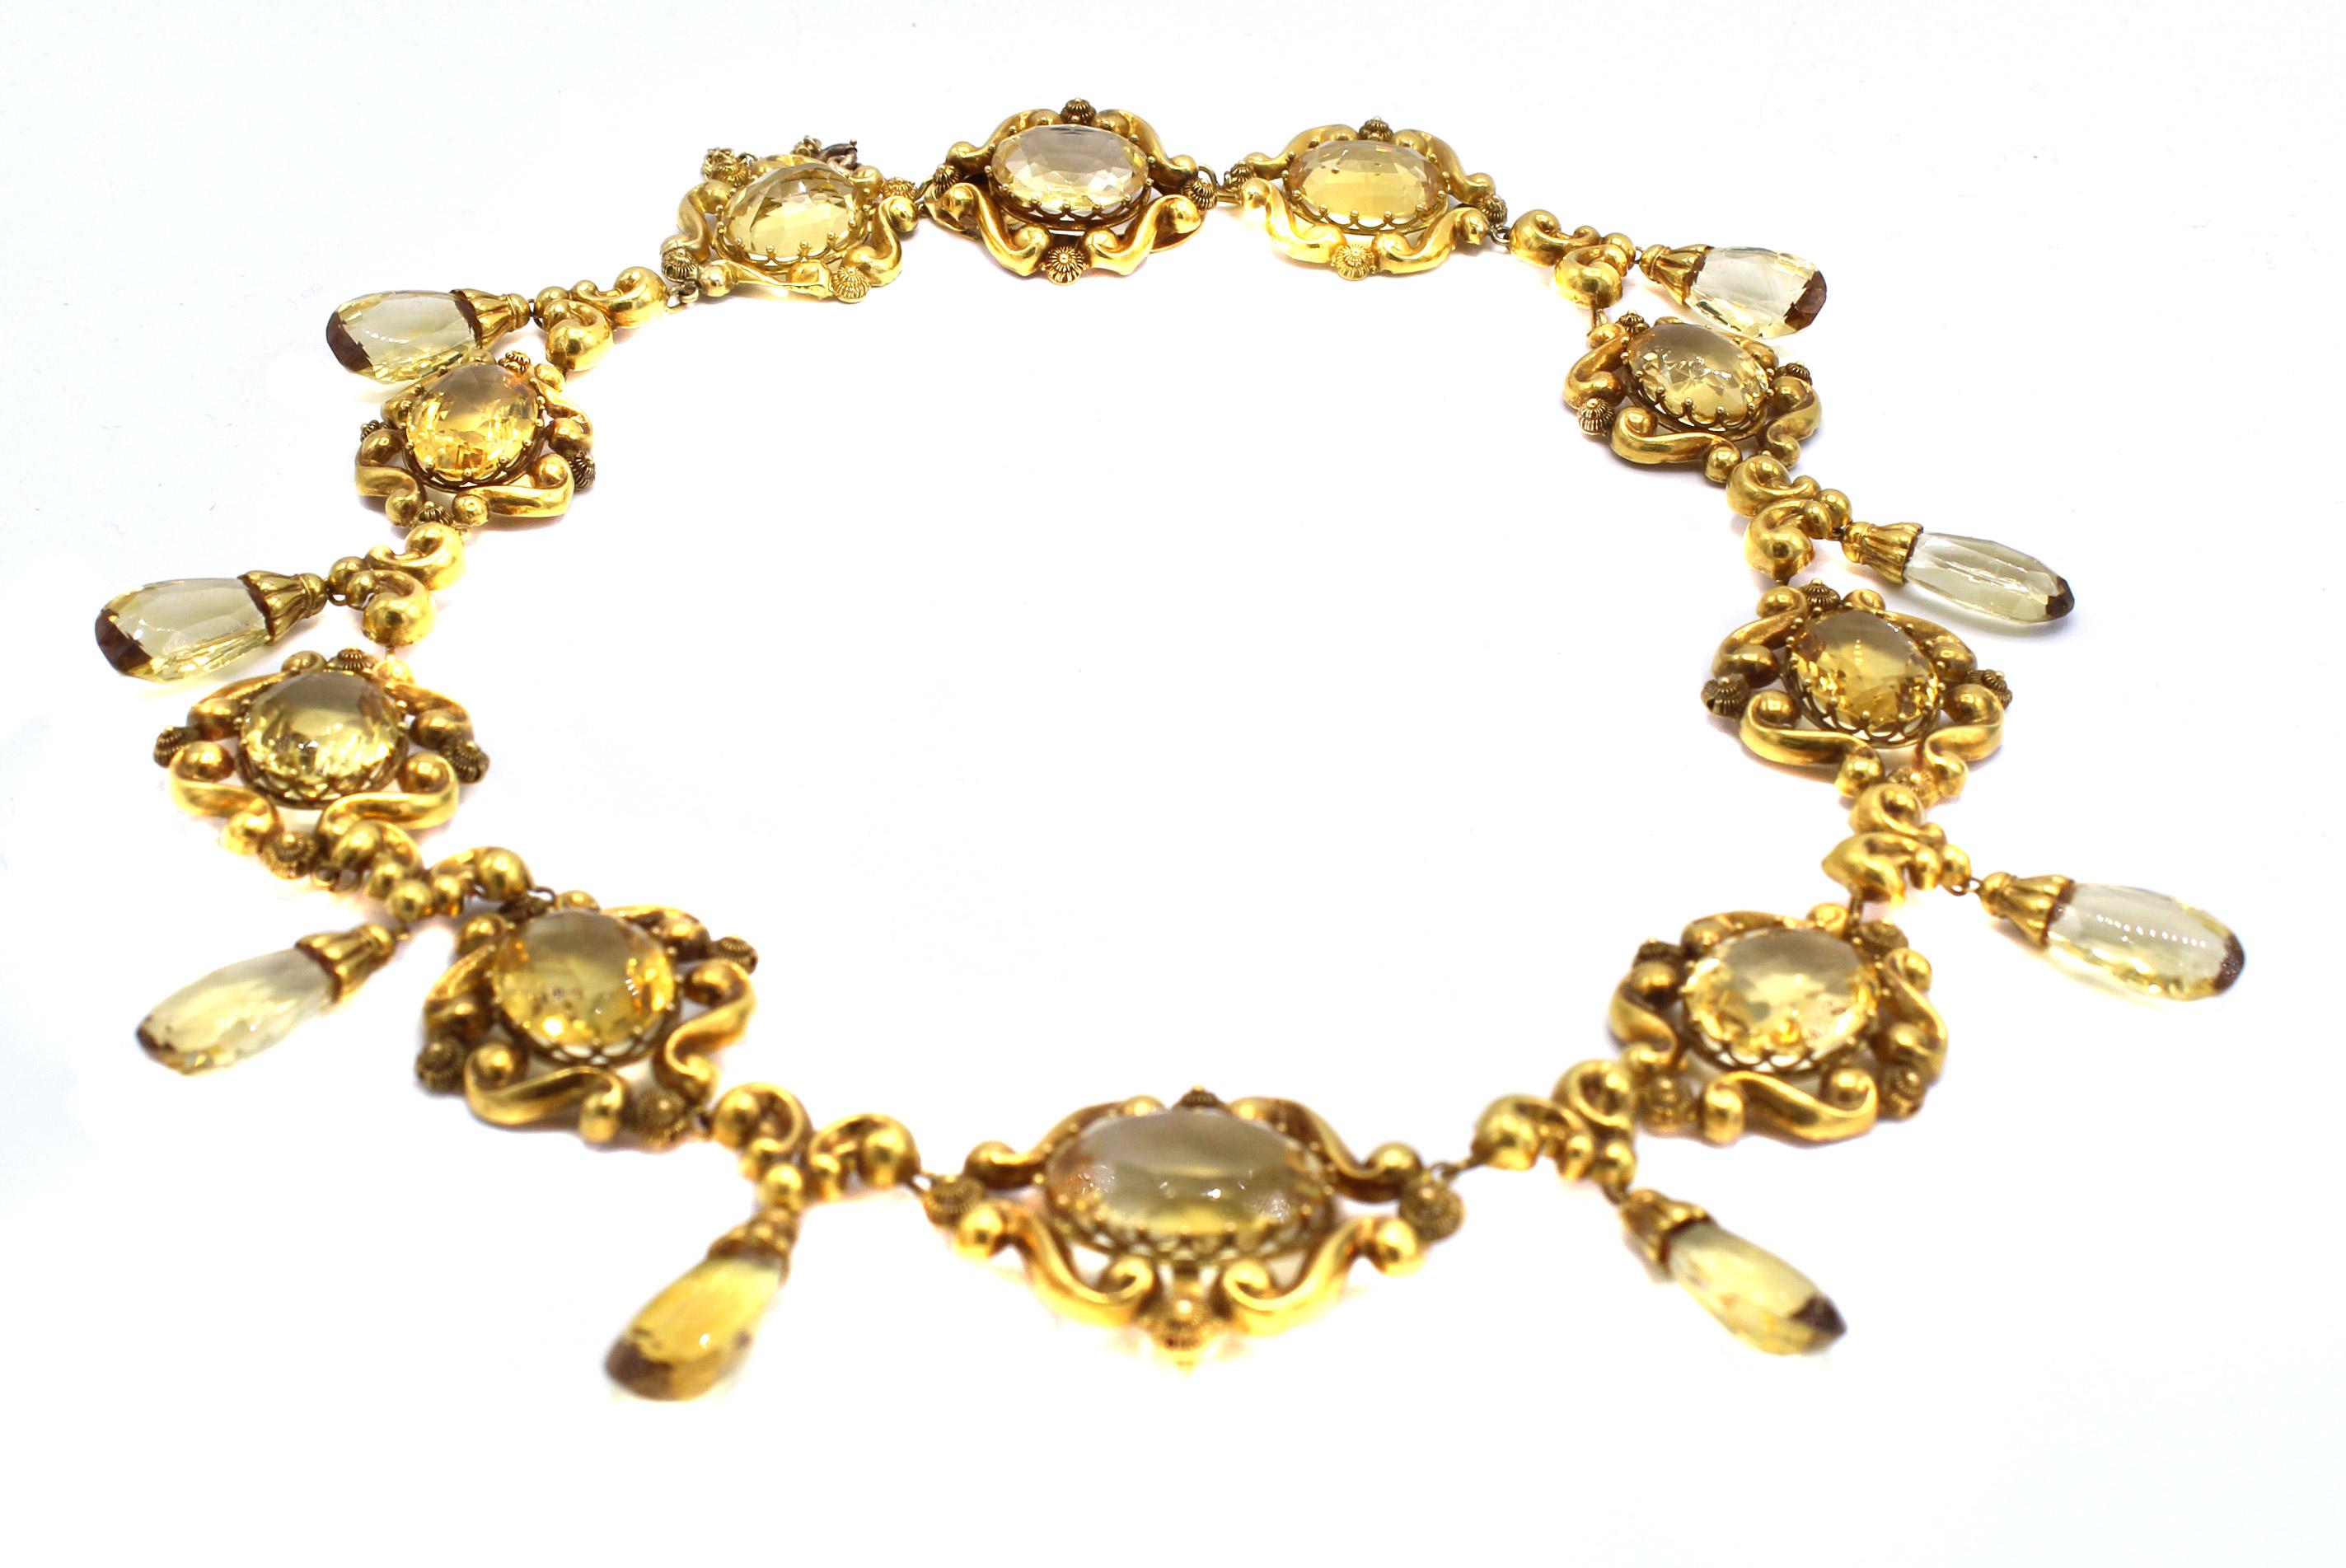 Beautifully designed and masterfully hand-crated this Victorian necklace from ca 1860 features 10 oval elements each set with an oval lemon citrine which are flexibly connected to 8 smaller elements which each have a briolette cut lemon citrine